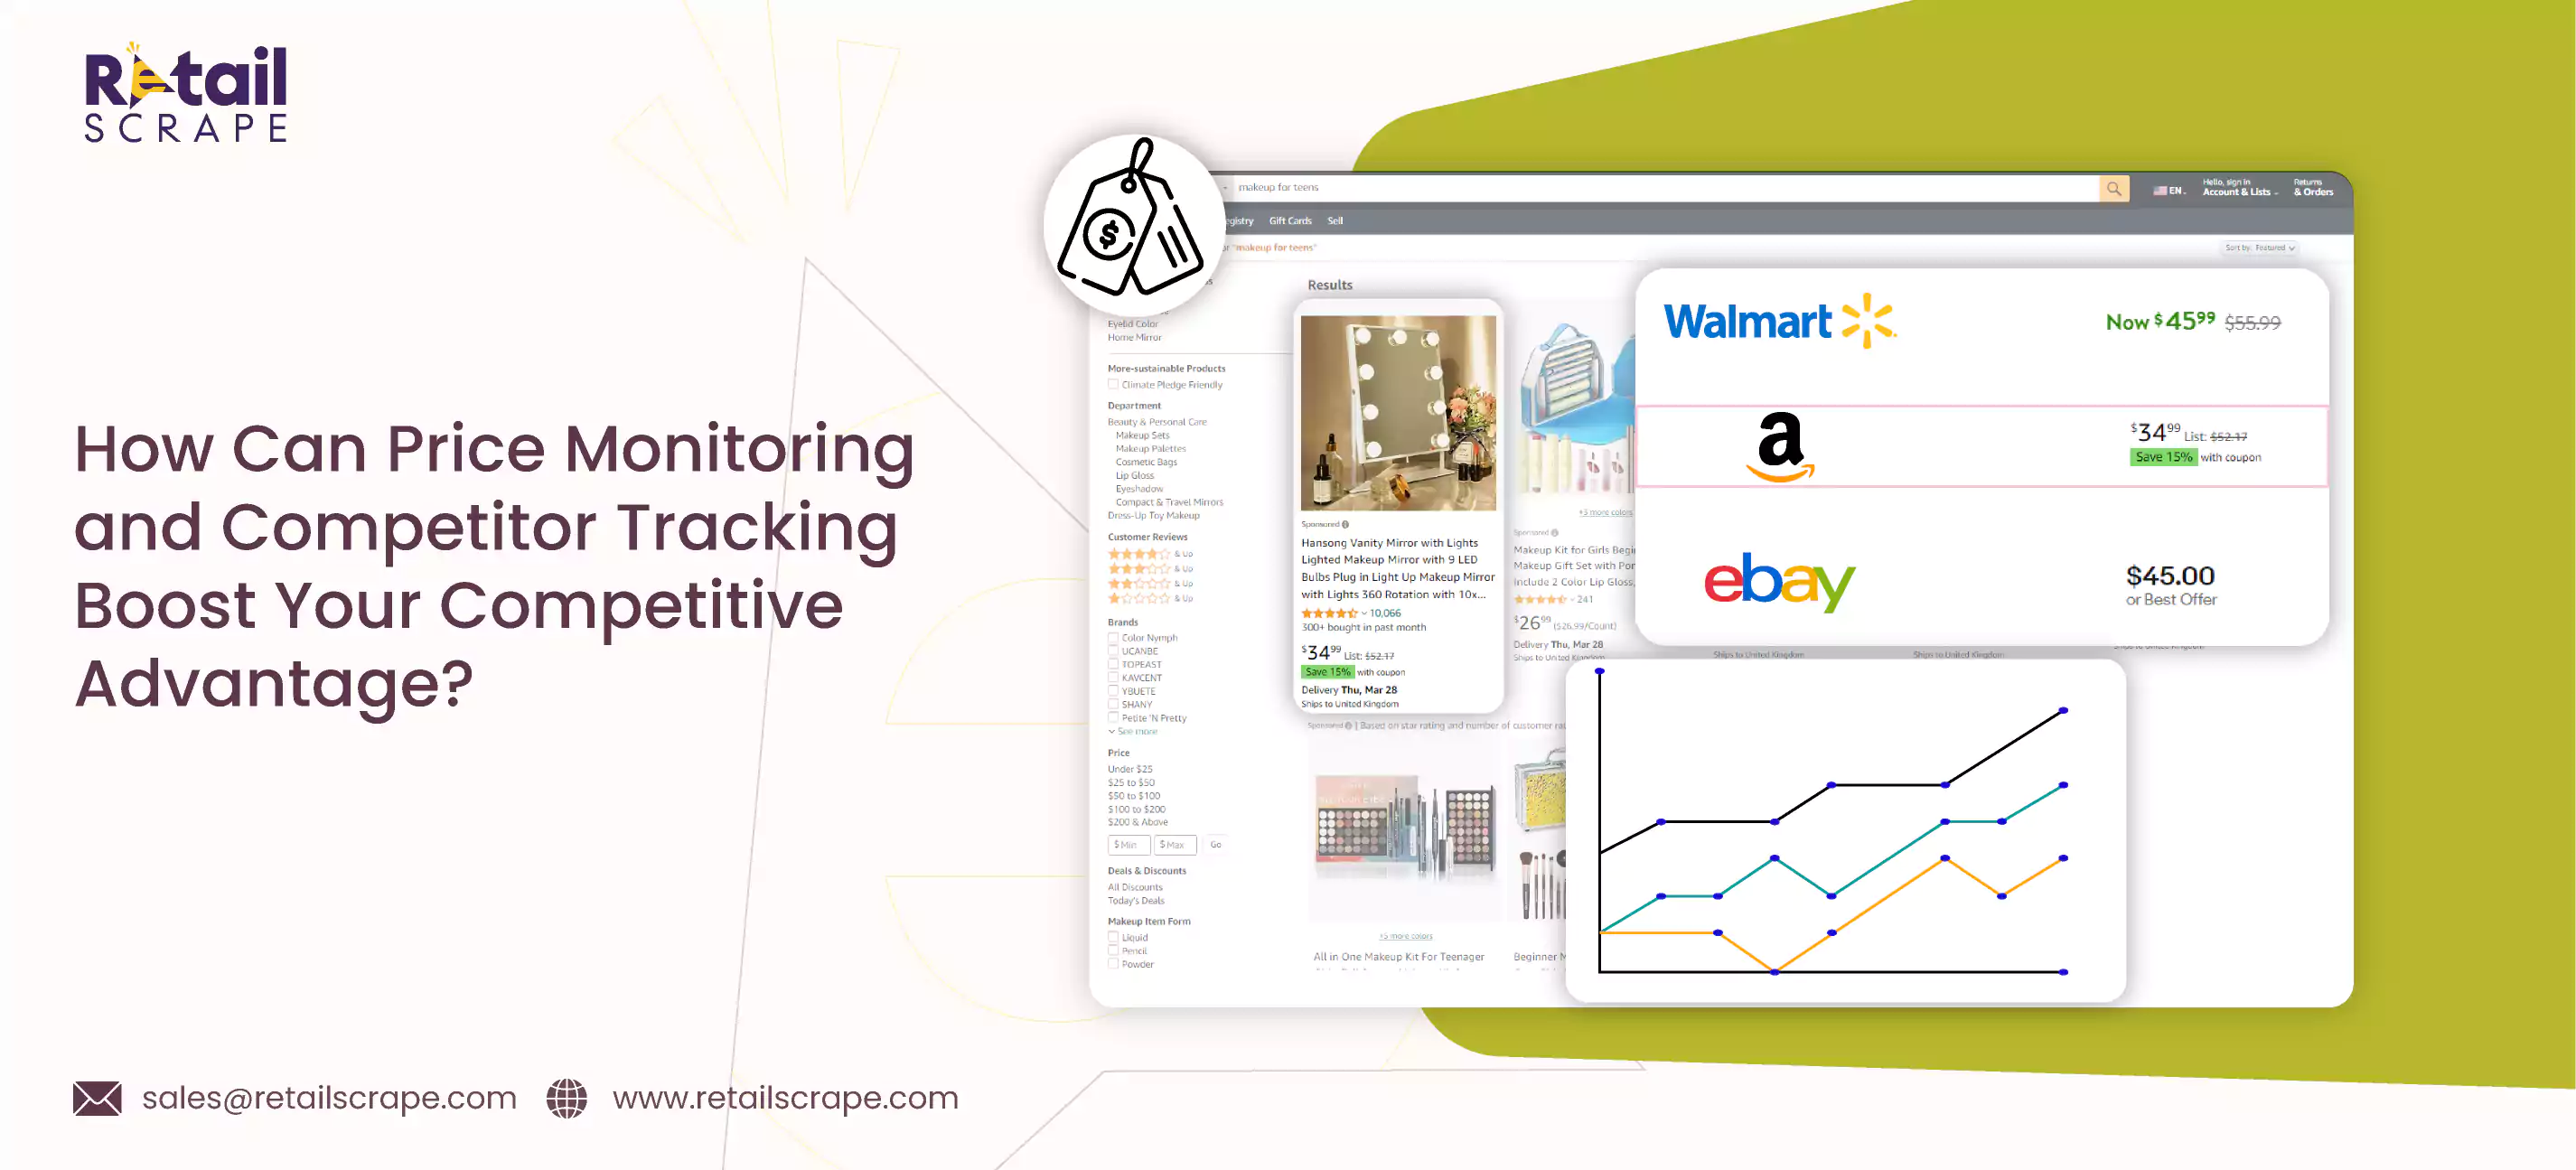 How Can Price Monitoring and Competitor Tracking Boost Your Competitive Advantage